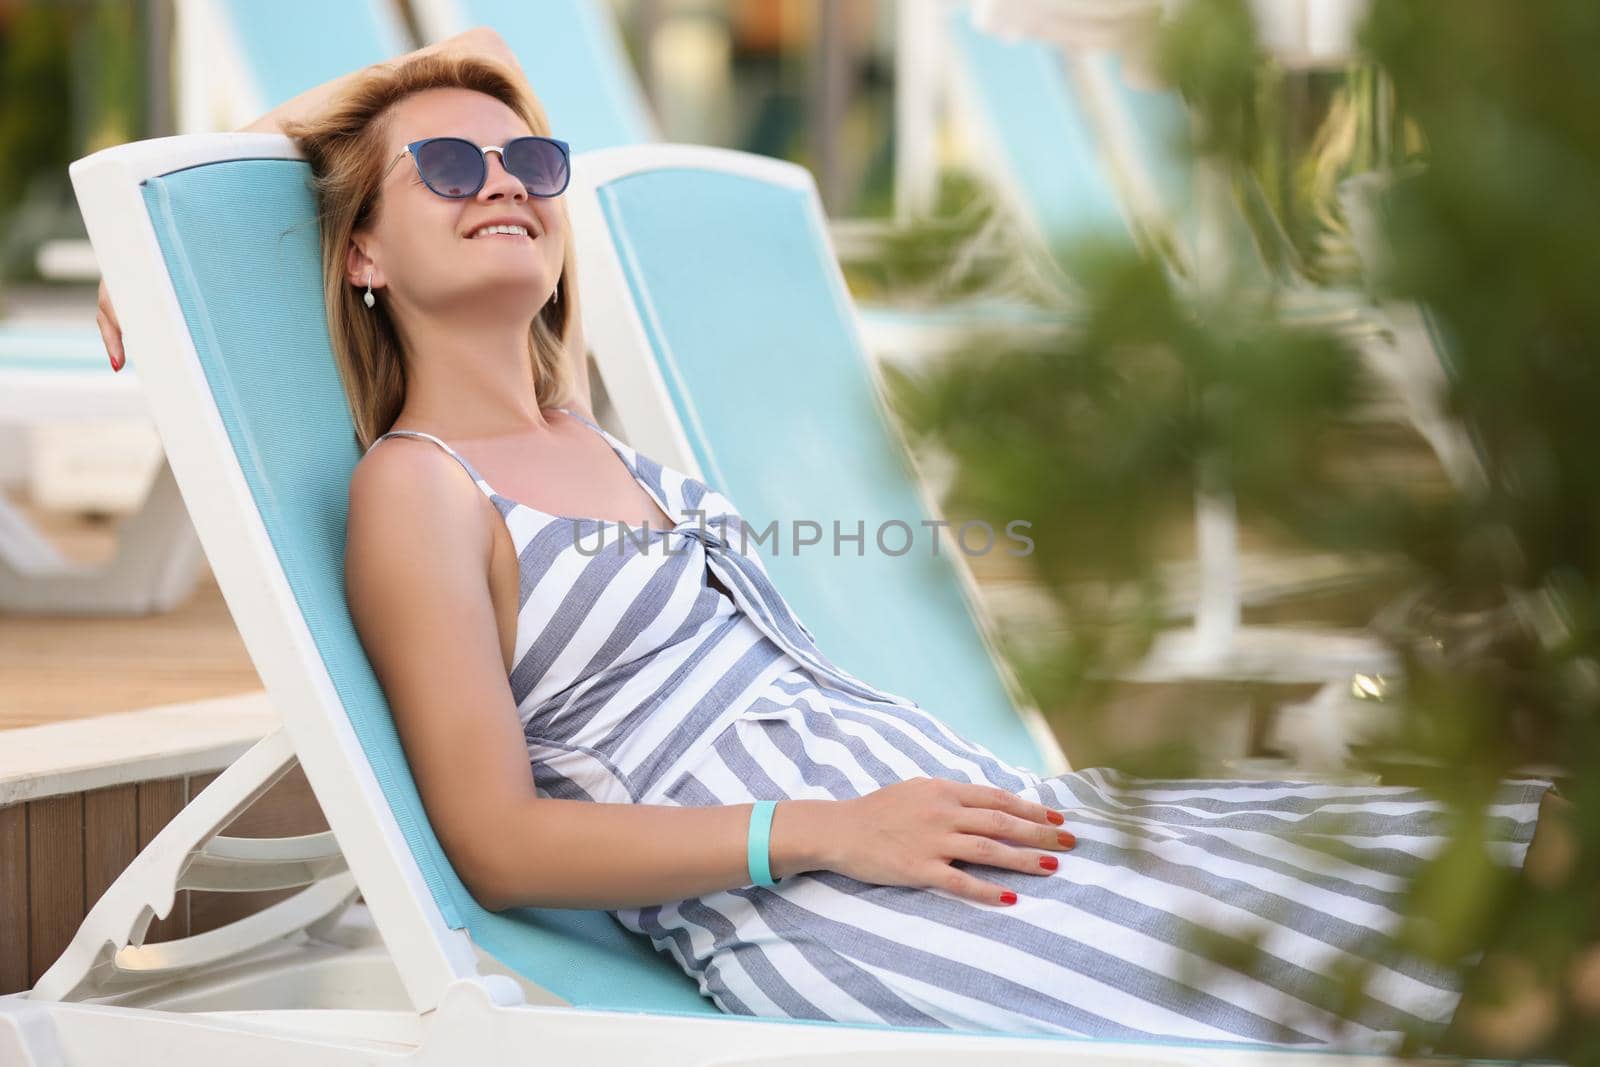 Portrait of happy young woman on sit on sunbed in pretty summer dress. Smiling relaxed female in sunglasses enjoy weather. Summer, chill, leisure concept